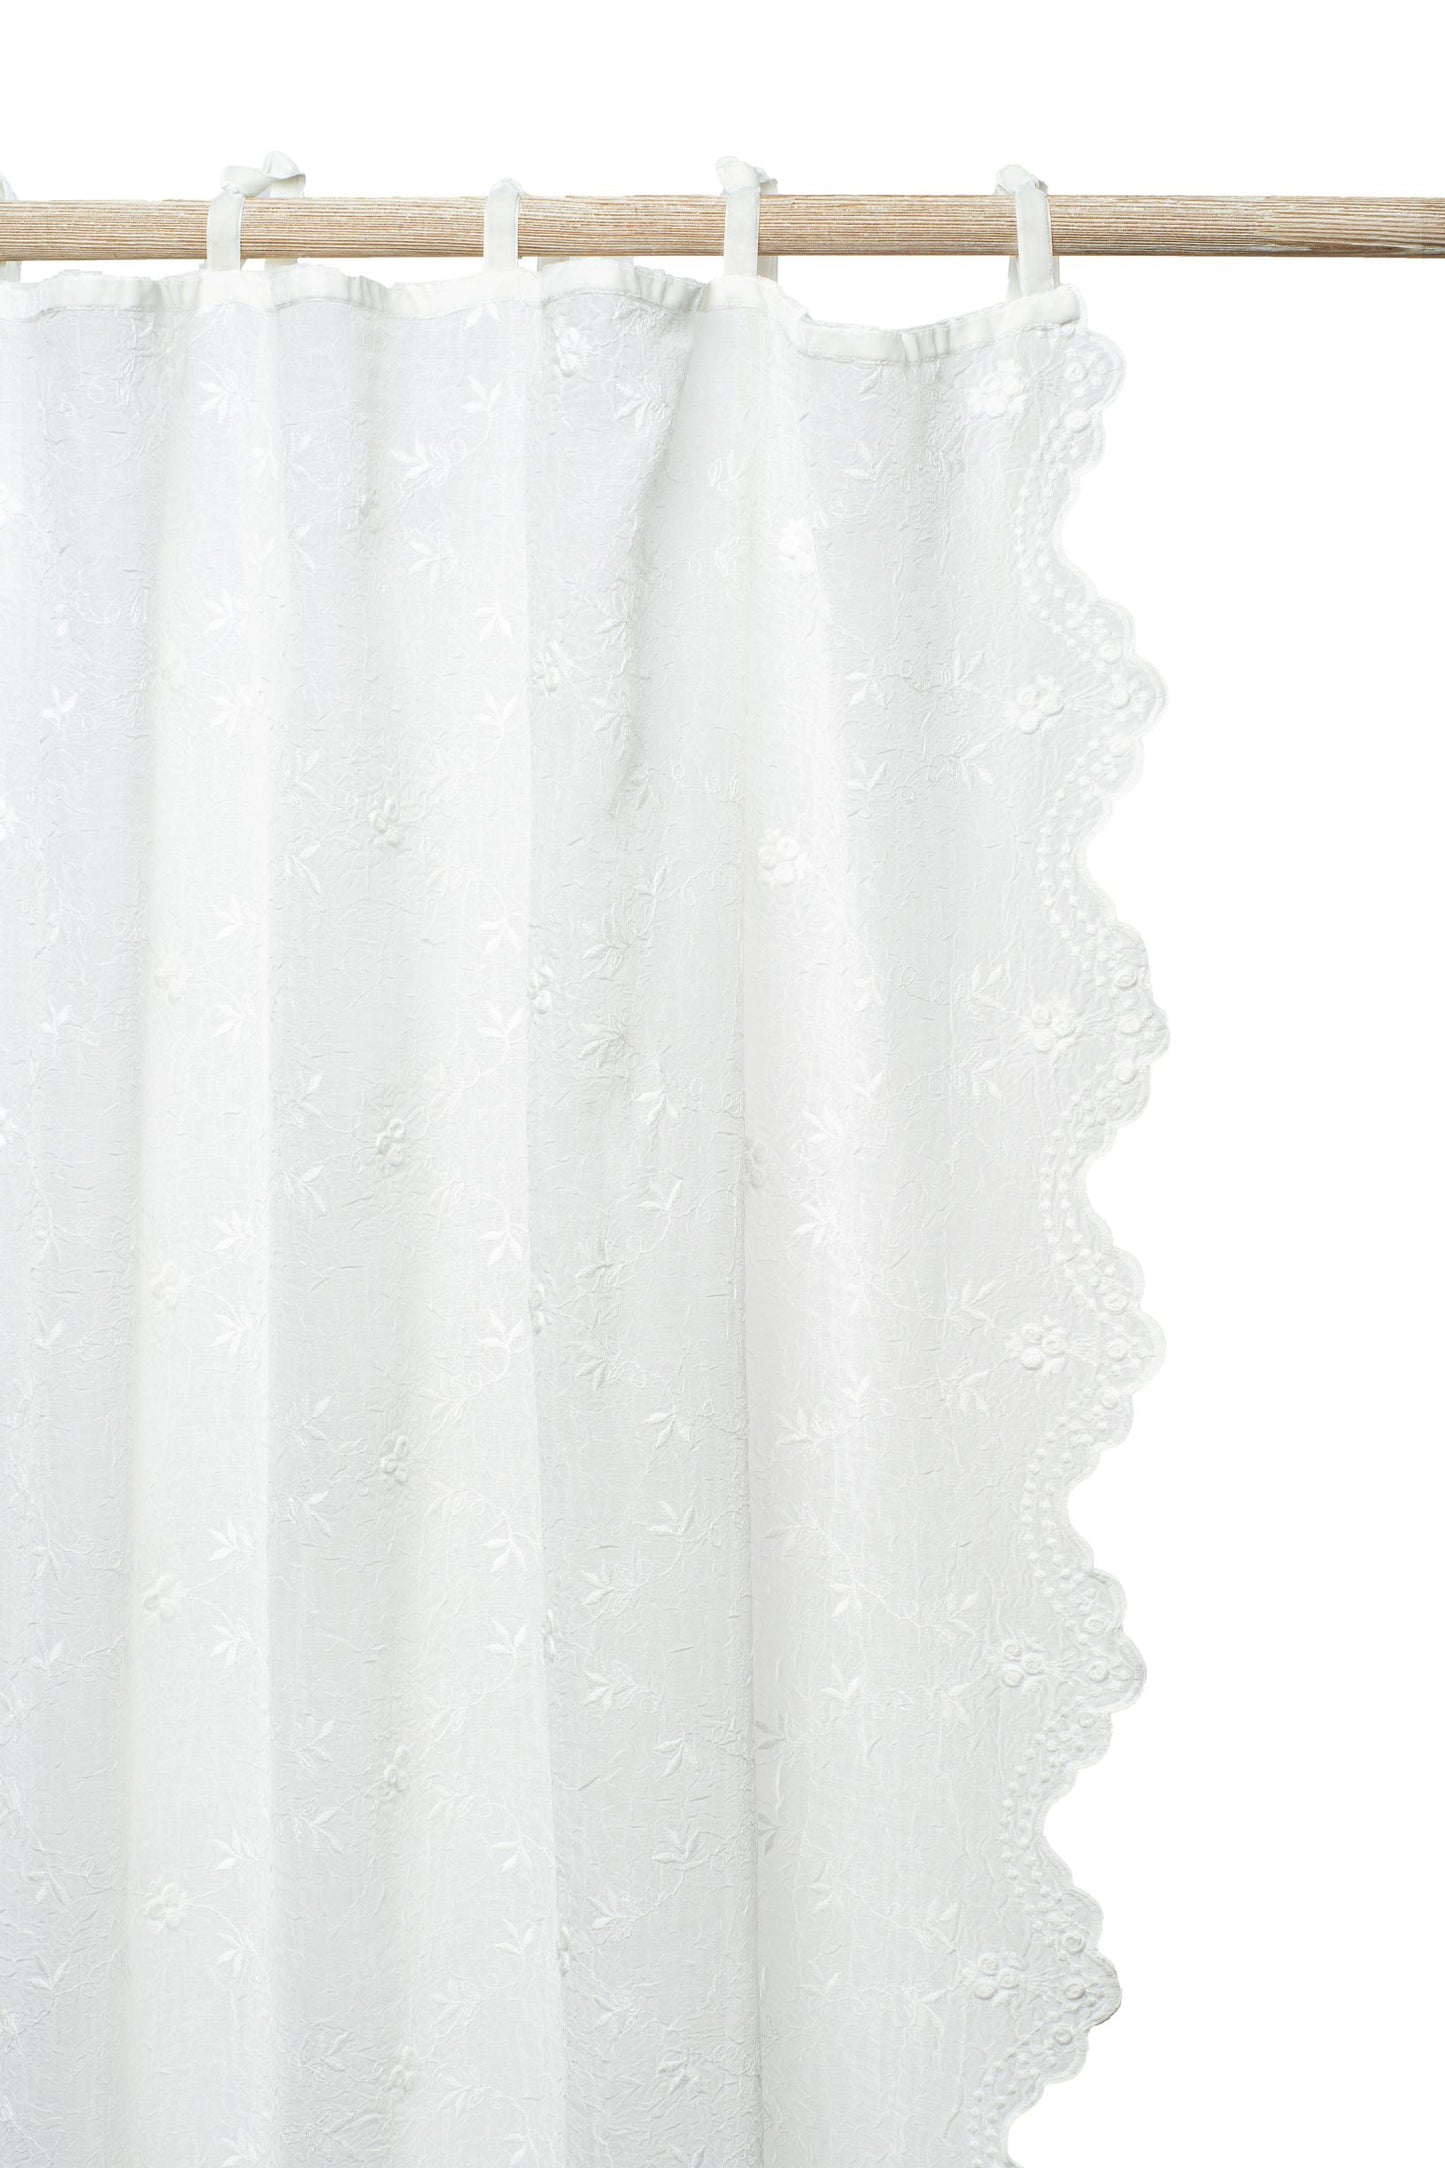 The Victoria embroidered voile curtain adds that special touch to your window. This design is timeless and will fit any interior. Finished with velvet ribbons and a lovely scallop on both lengths.